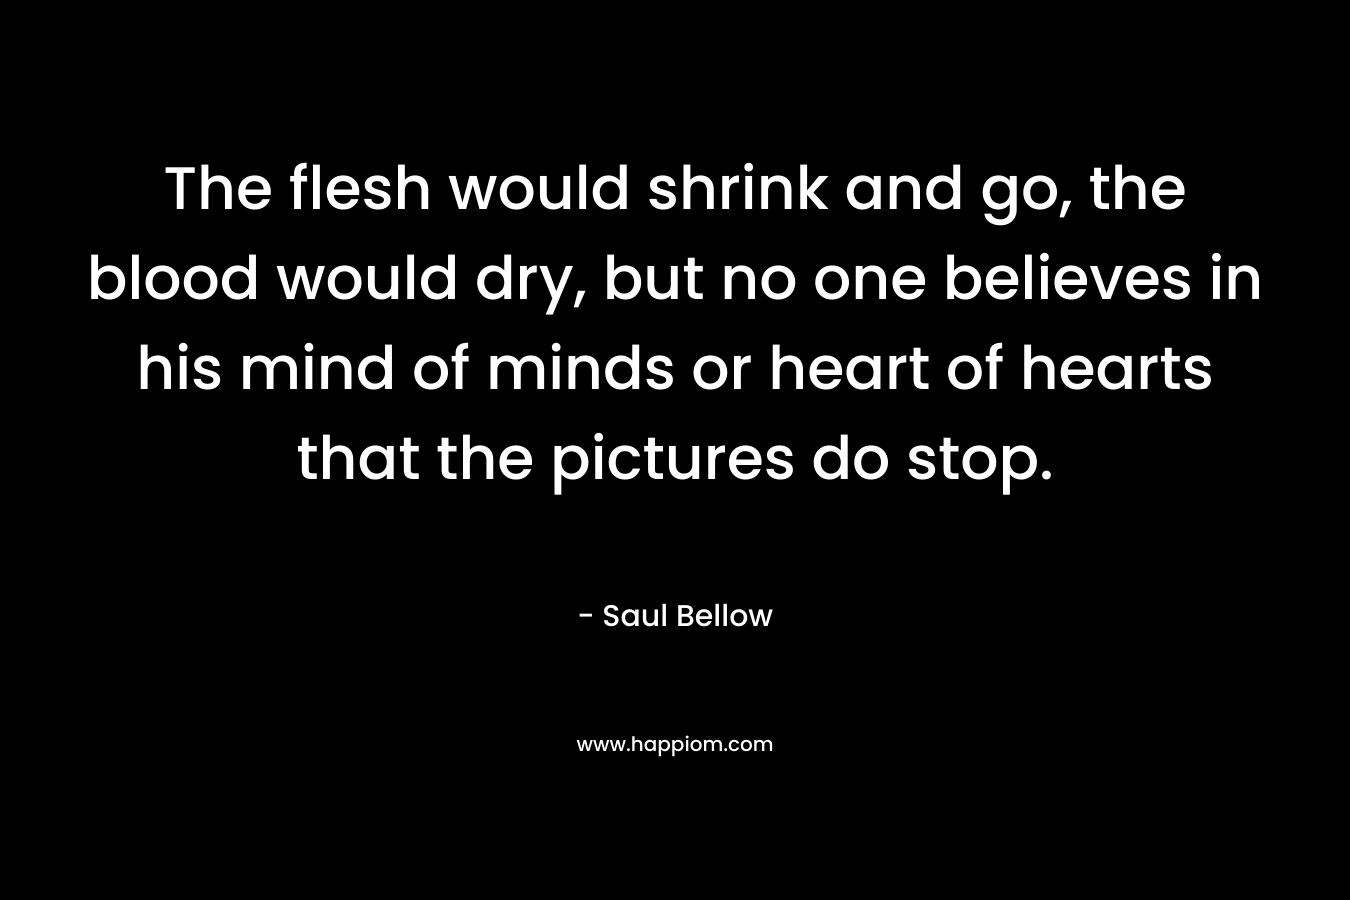 The flesh would shrink and go, the blood would dry, but no one believes in his mind of minds or heart of hearts that the pictures do stop. – Saul Bellow